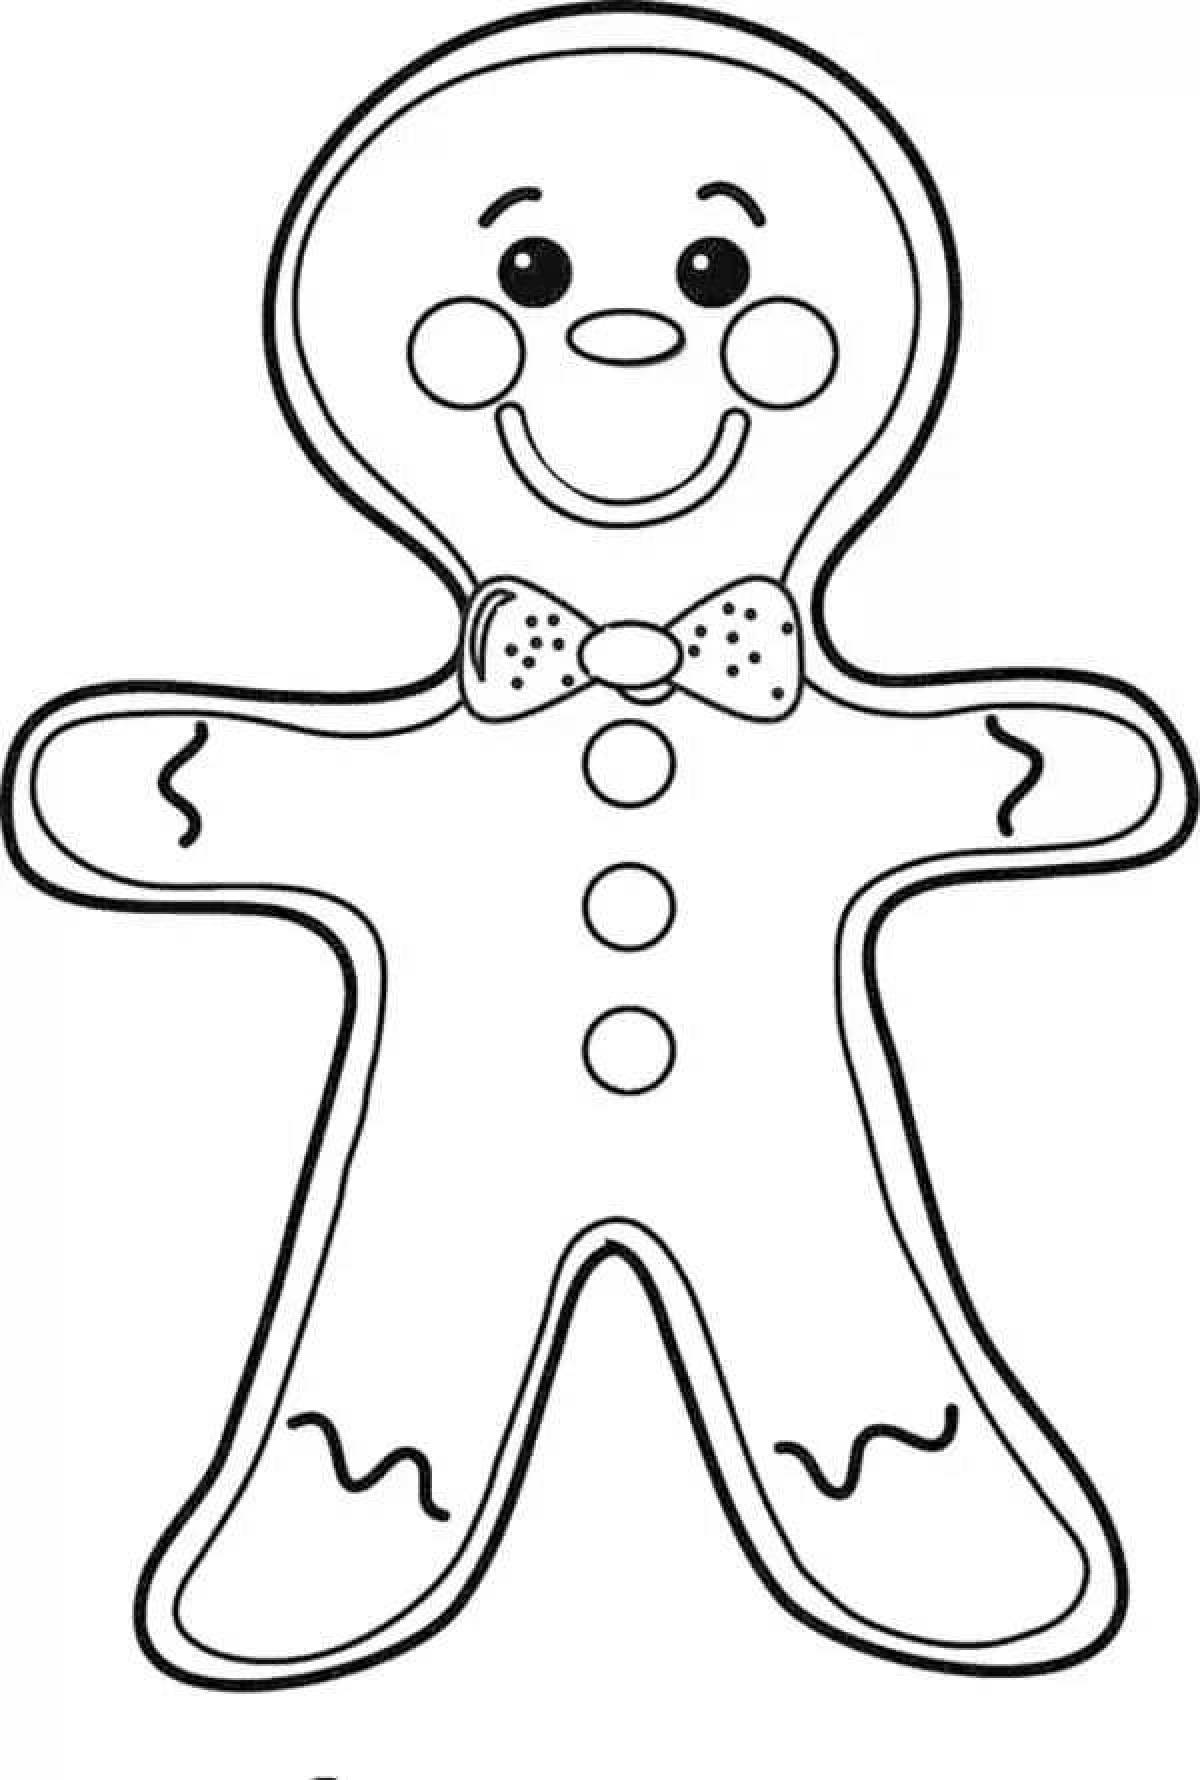 Cute Gingerbread Coloring Page